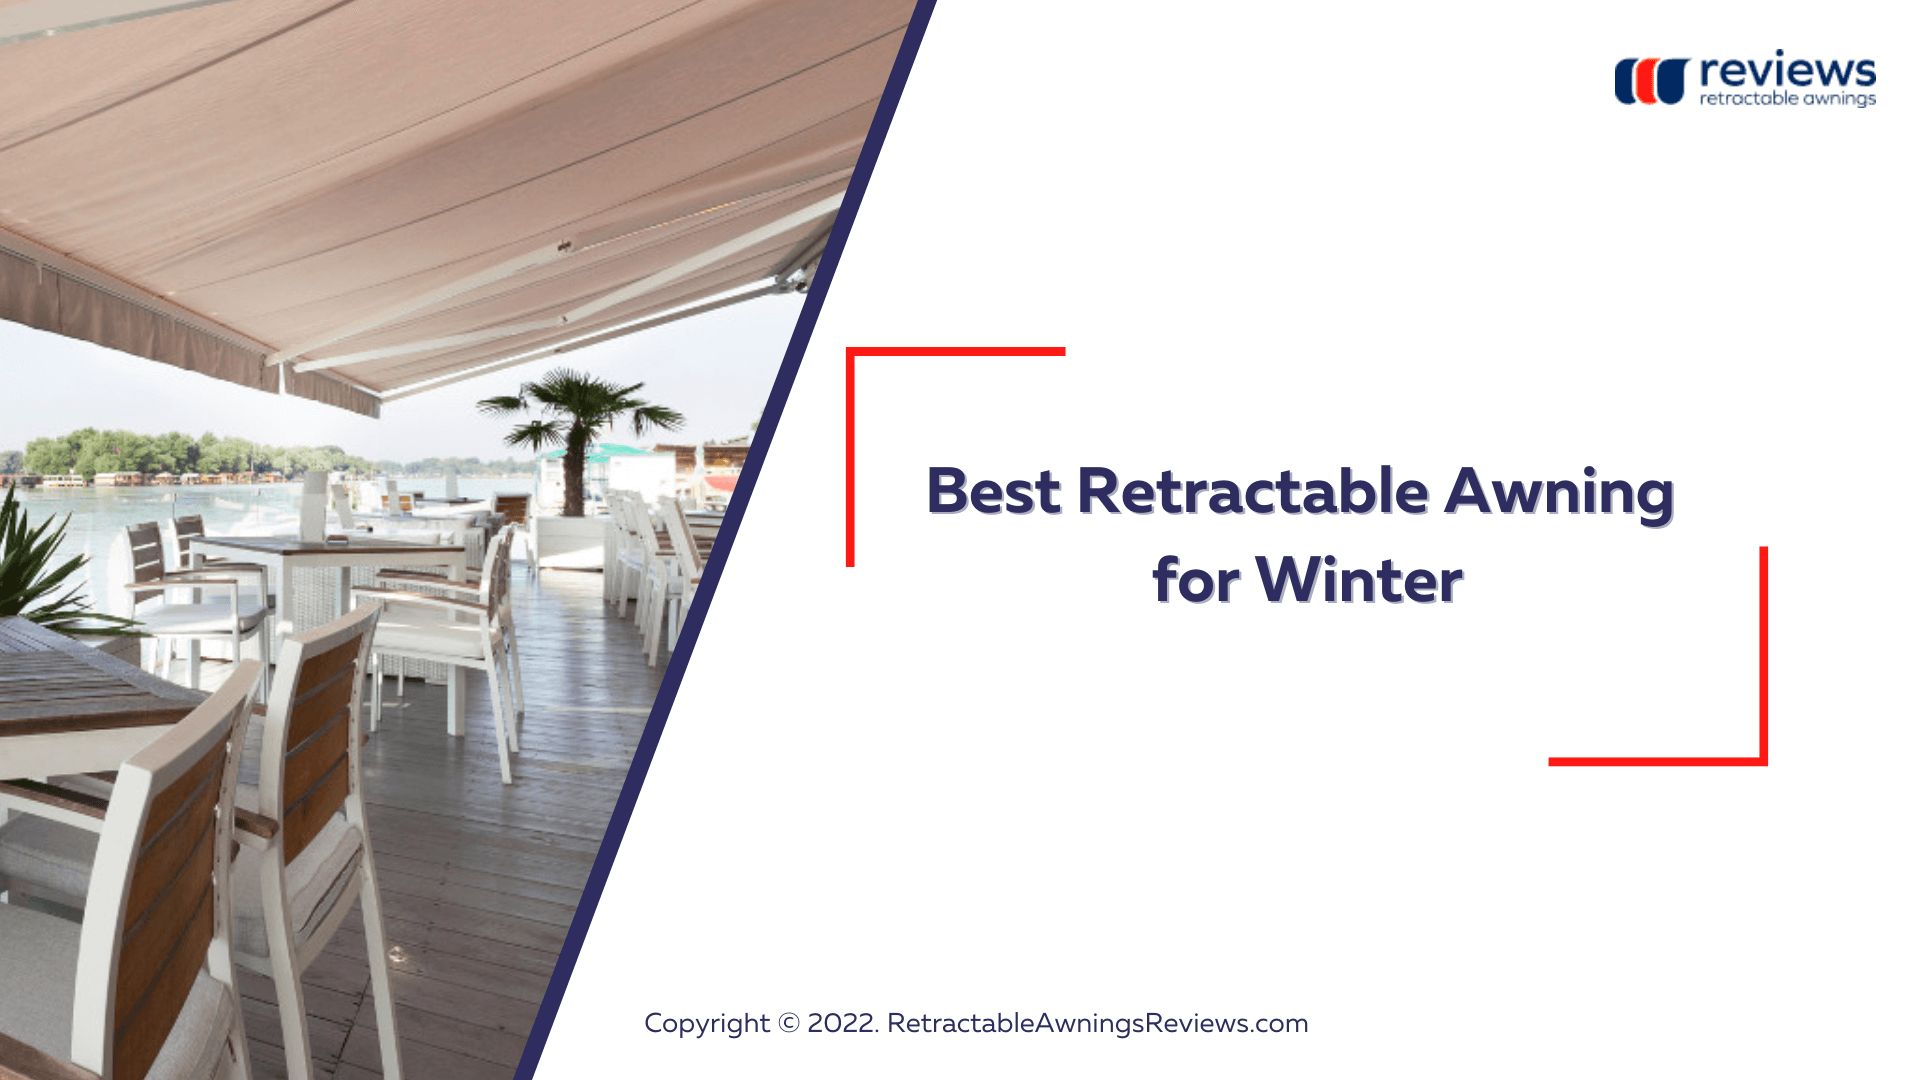 Best Retractable Awning for Winter